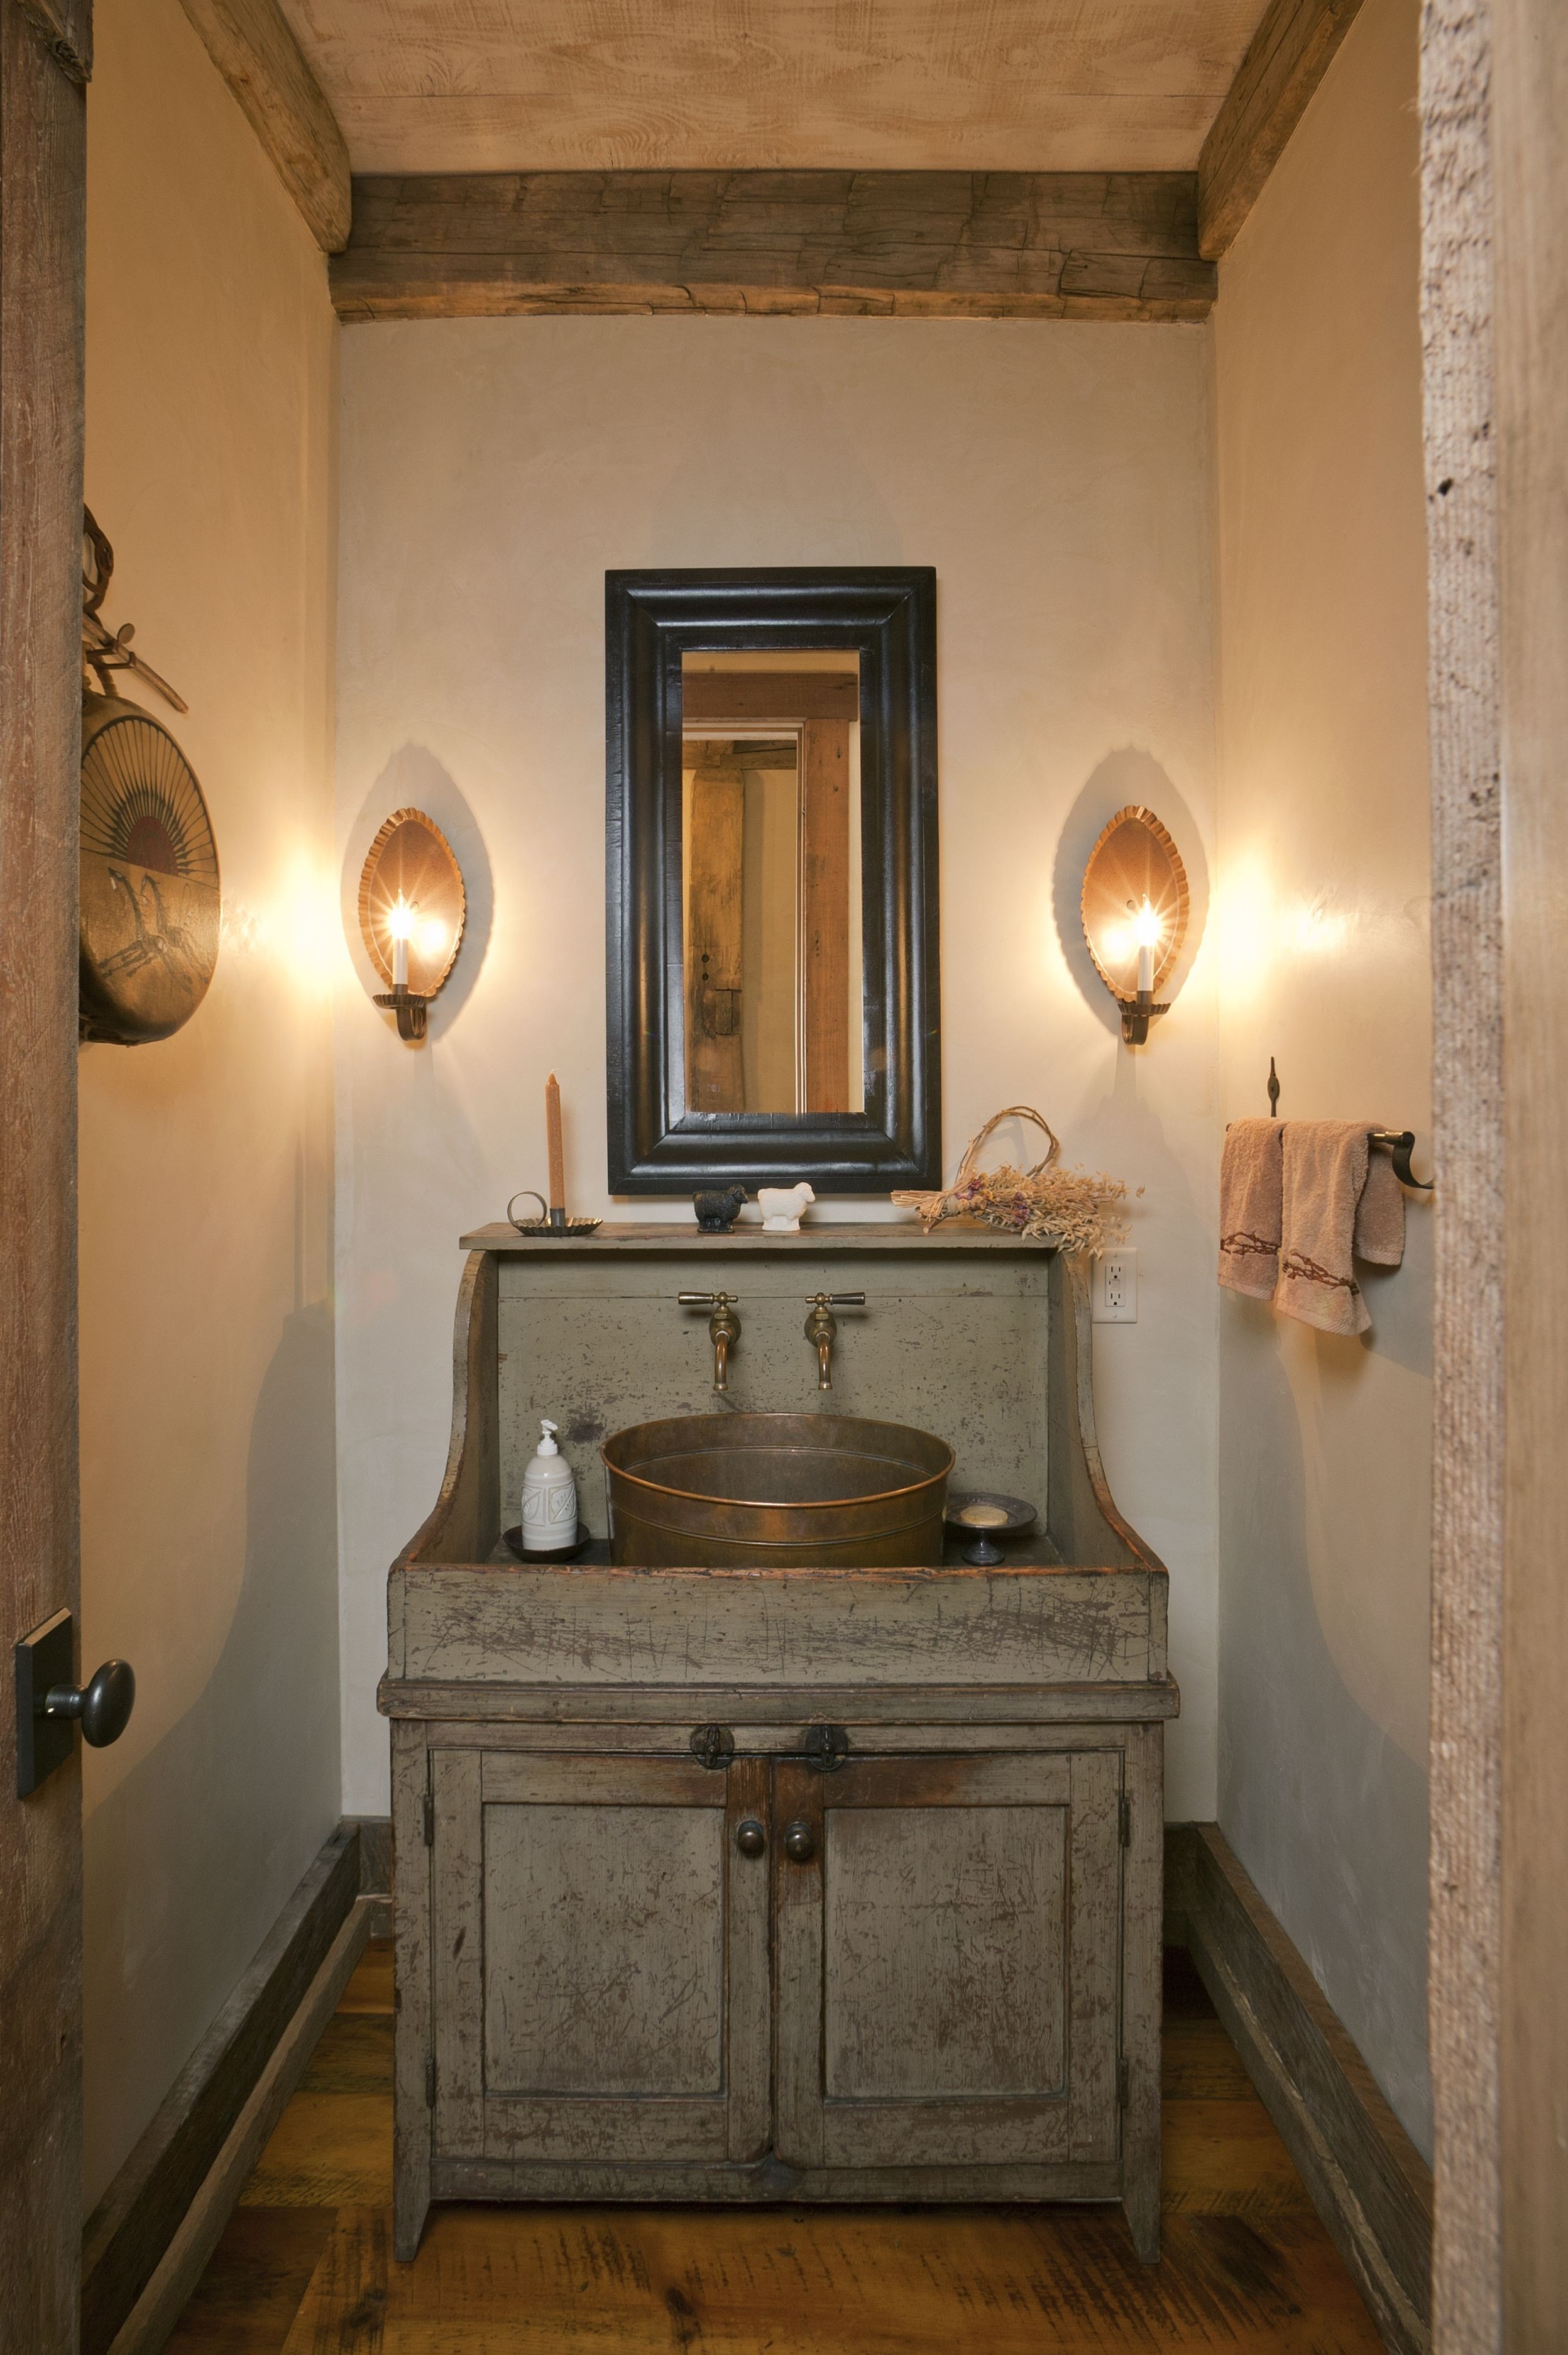 Vanities bath as well as double wall lights in small